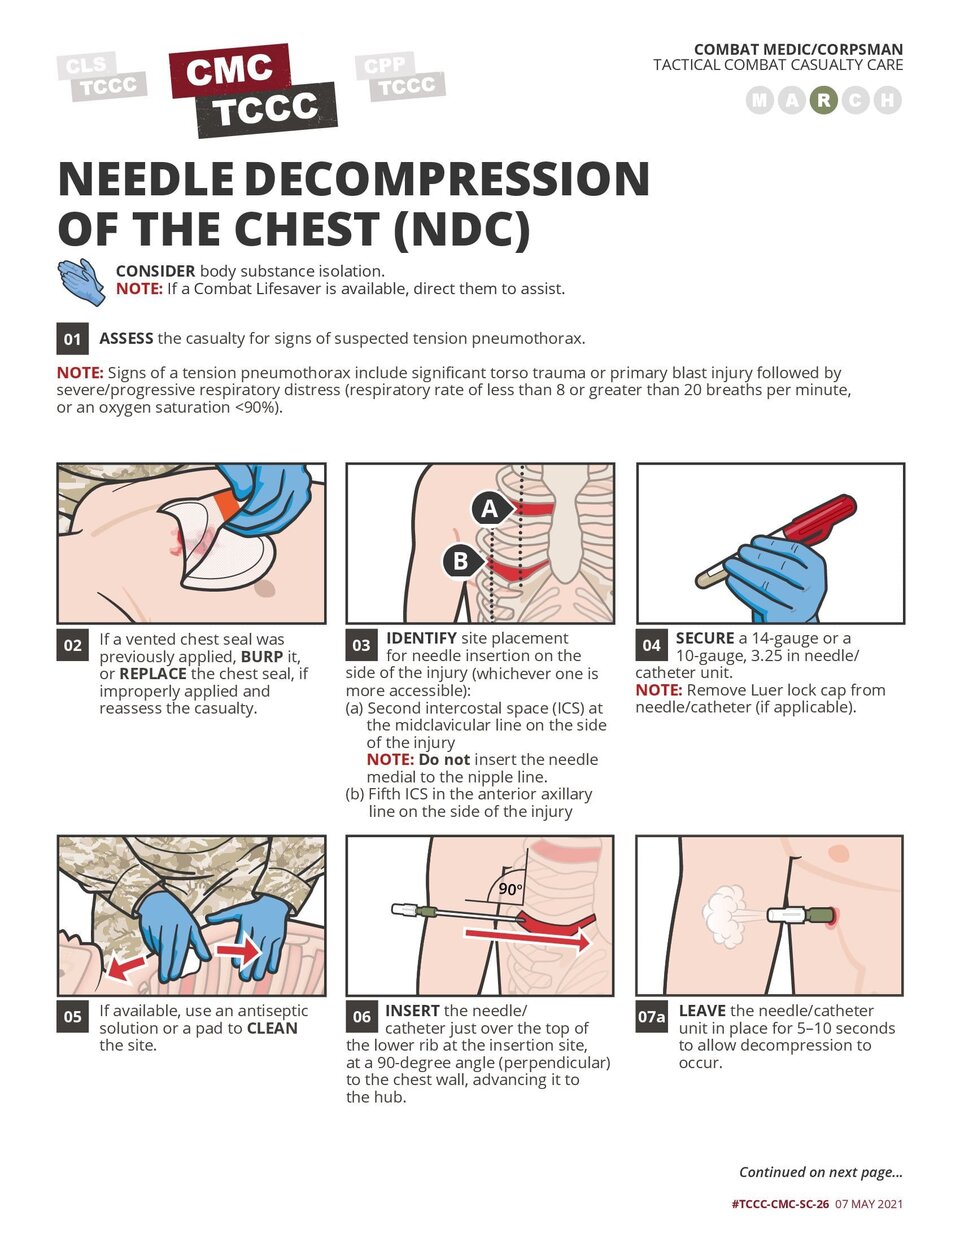 Bilateral Needle Decompression of the Chest